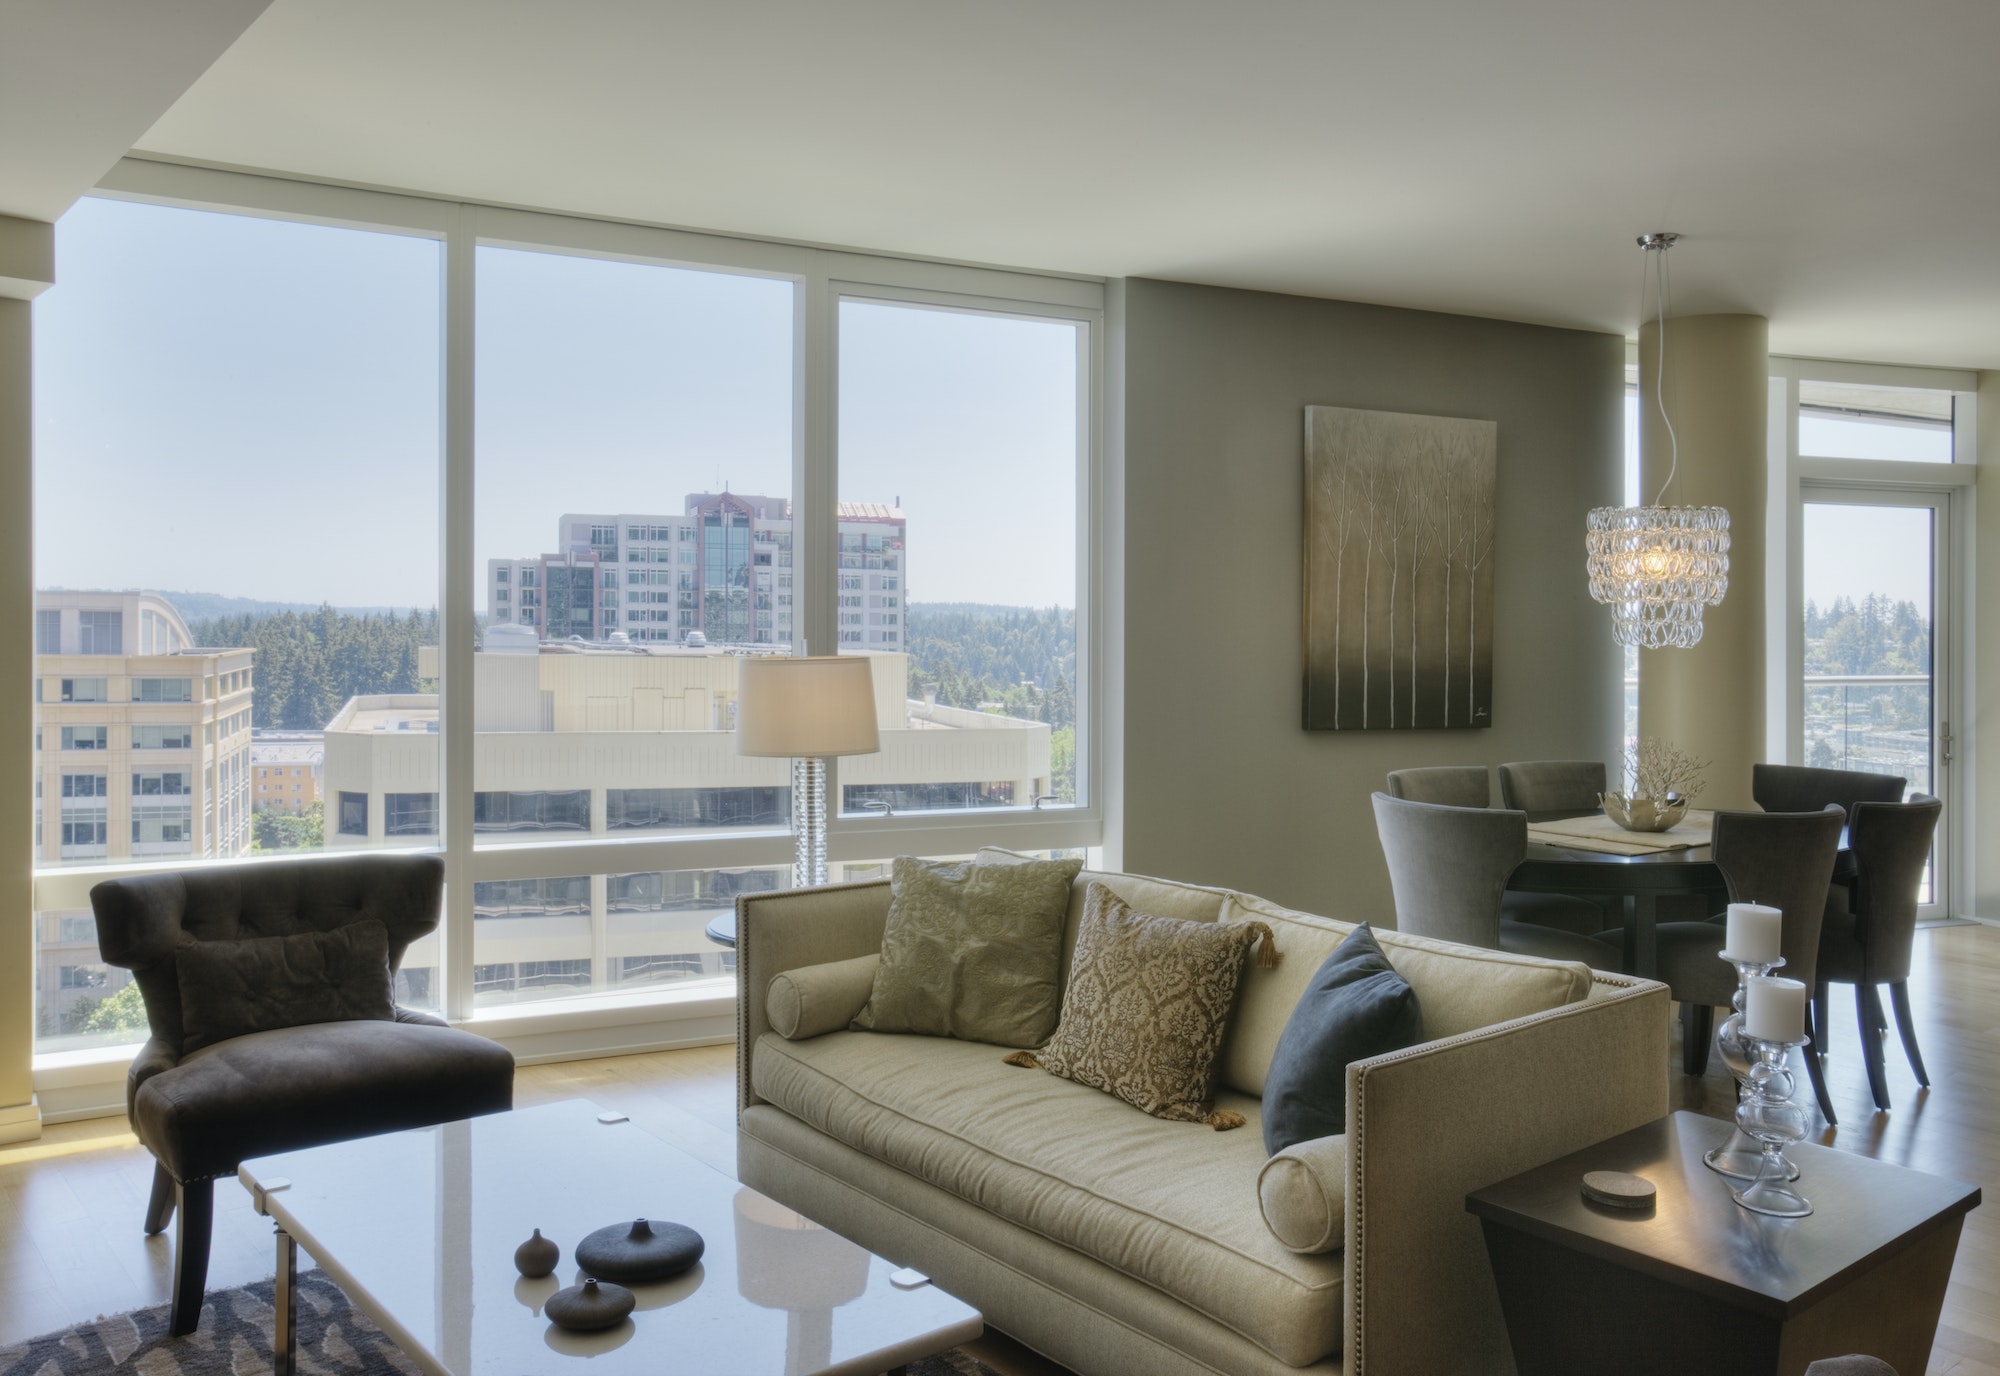 Living room and dining room in luxury highrise apartment